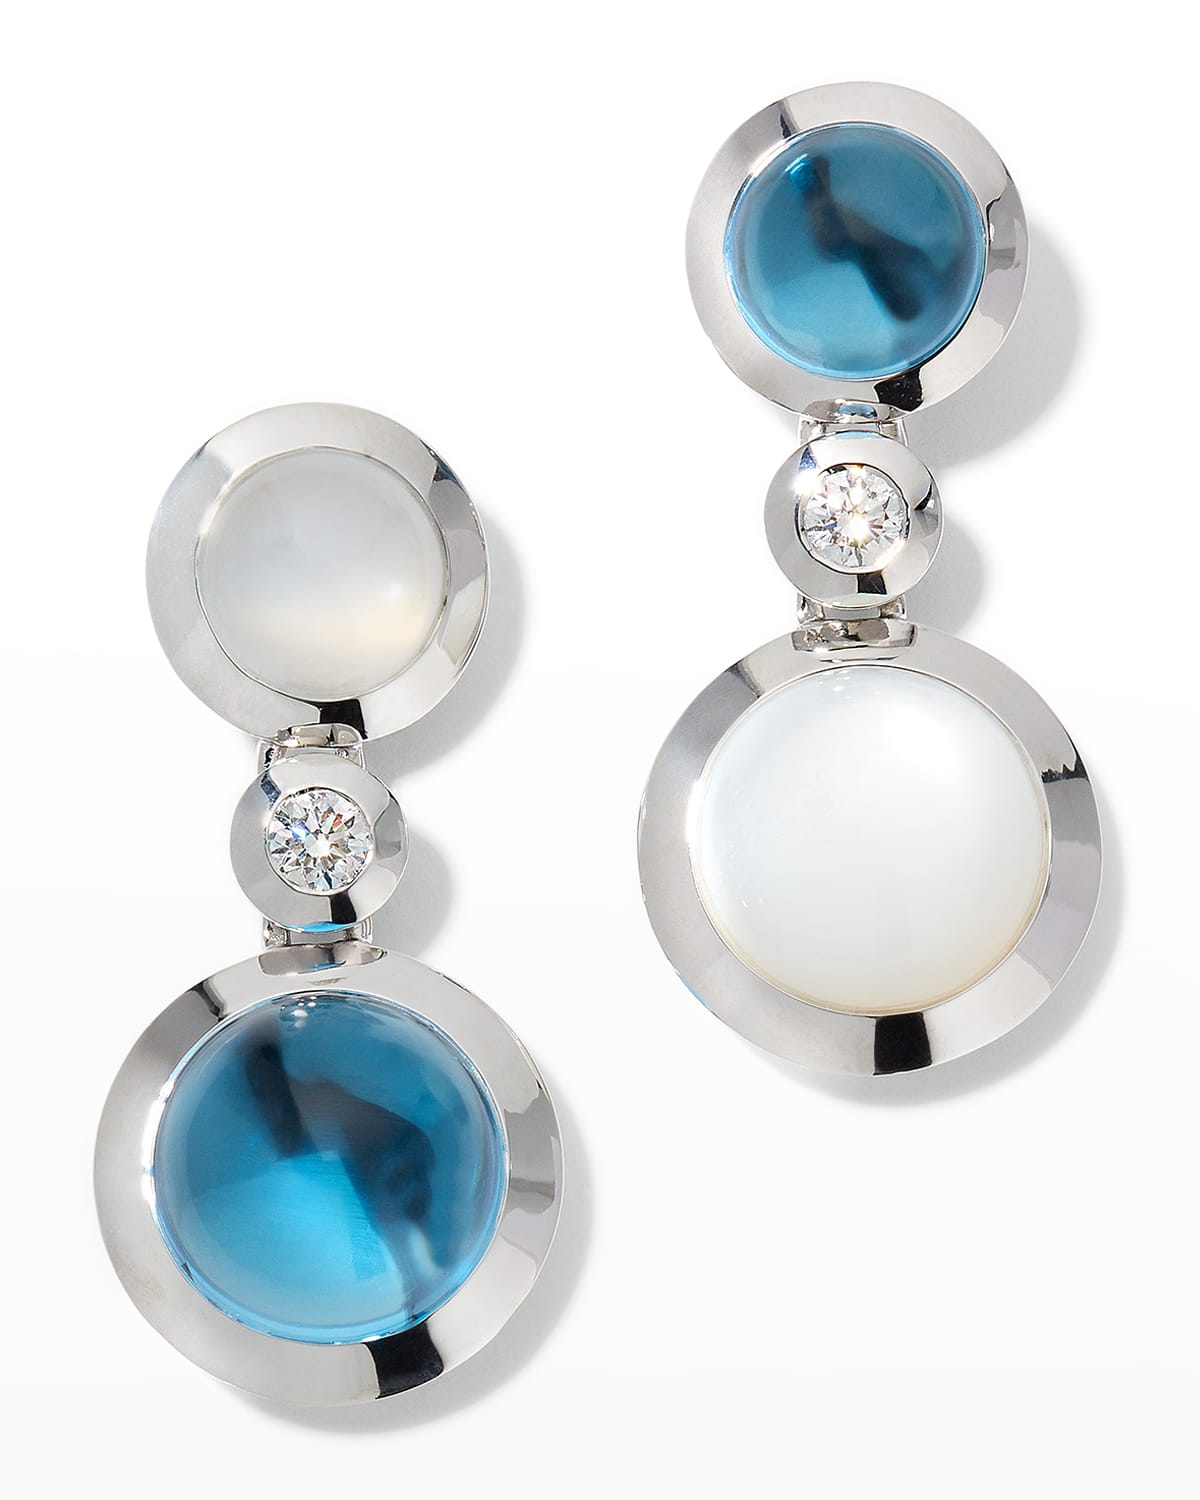 White Gold Bouton Ocean Earrings with 2 Cabochons